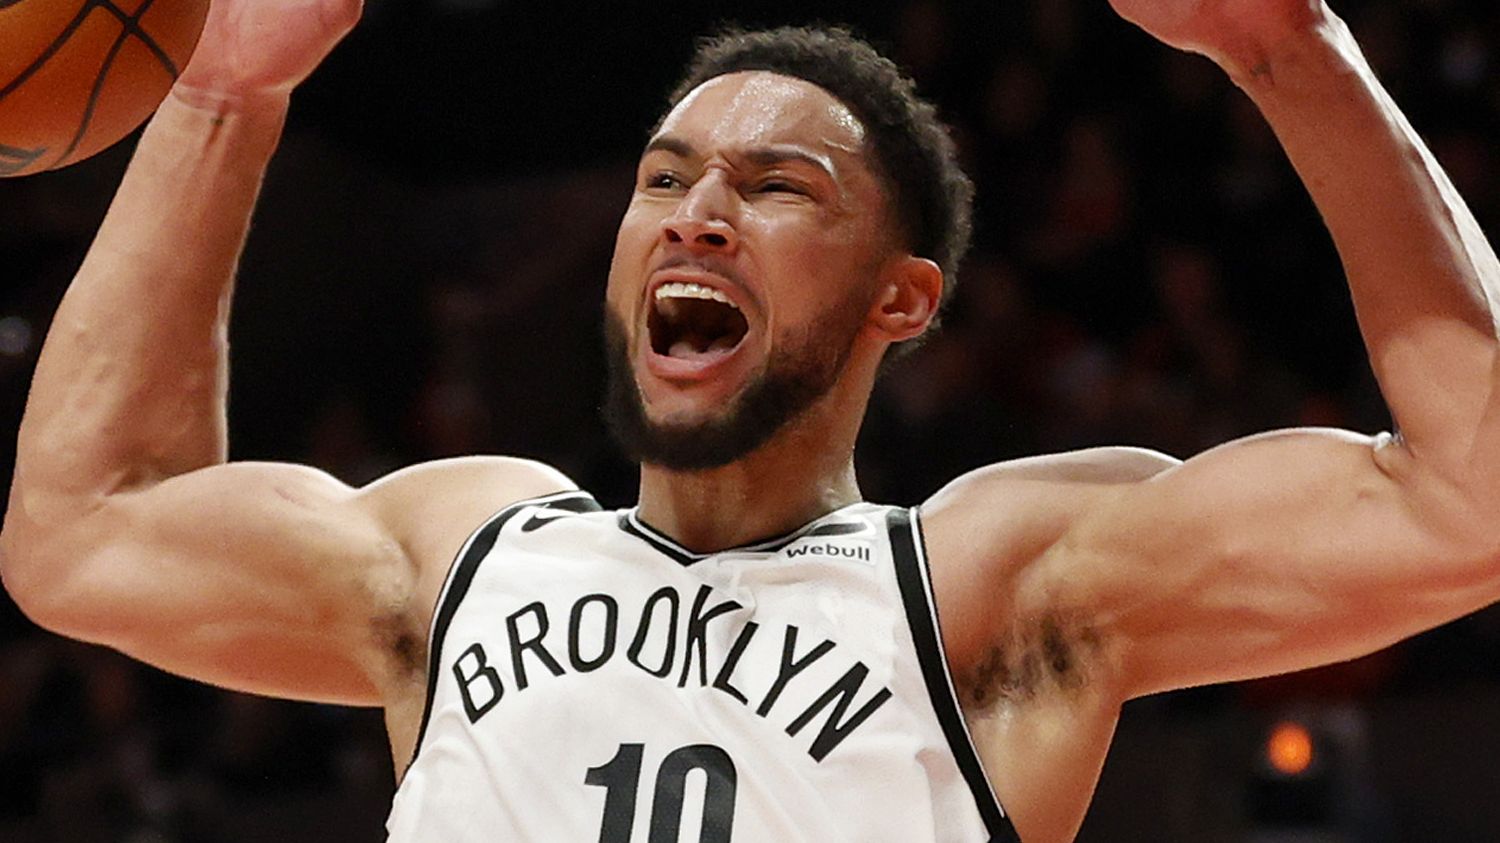 PORTLAND, OREGON - NOVEMBER 17: Ben Simmons #10 of the Brooklyn Nets dunks during the third quarter against the Portland Trail Blazers at Moda Center on November 17, 2022 in Portland, Oregon. NOTE TO USER: User expressly acknowledges and agrees that, by downloading and or using this photograph, User is consenting to the terms and conditions of the Getty Images License Agreement. (Photo by Steph Chambers/Getty Images)